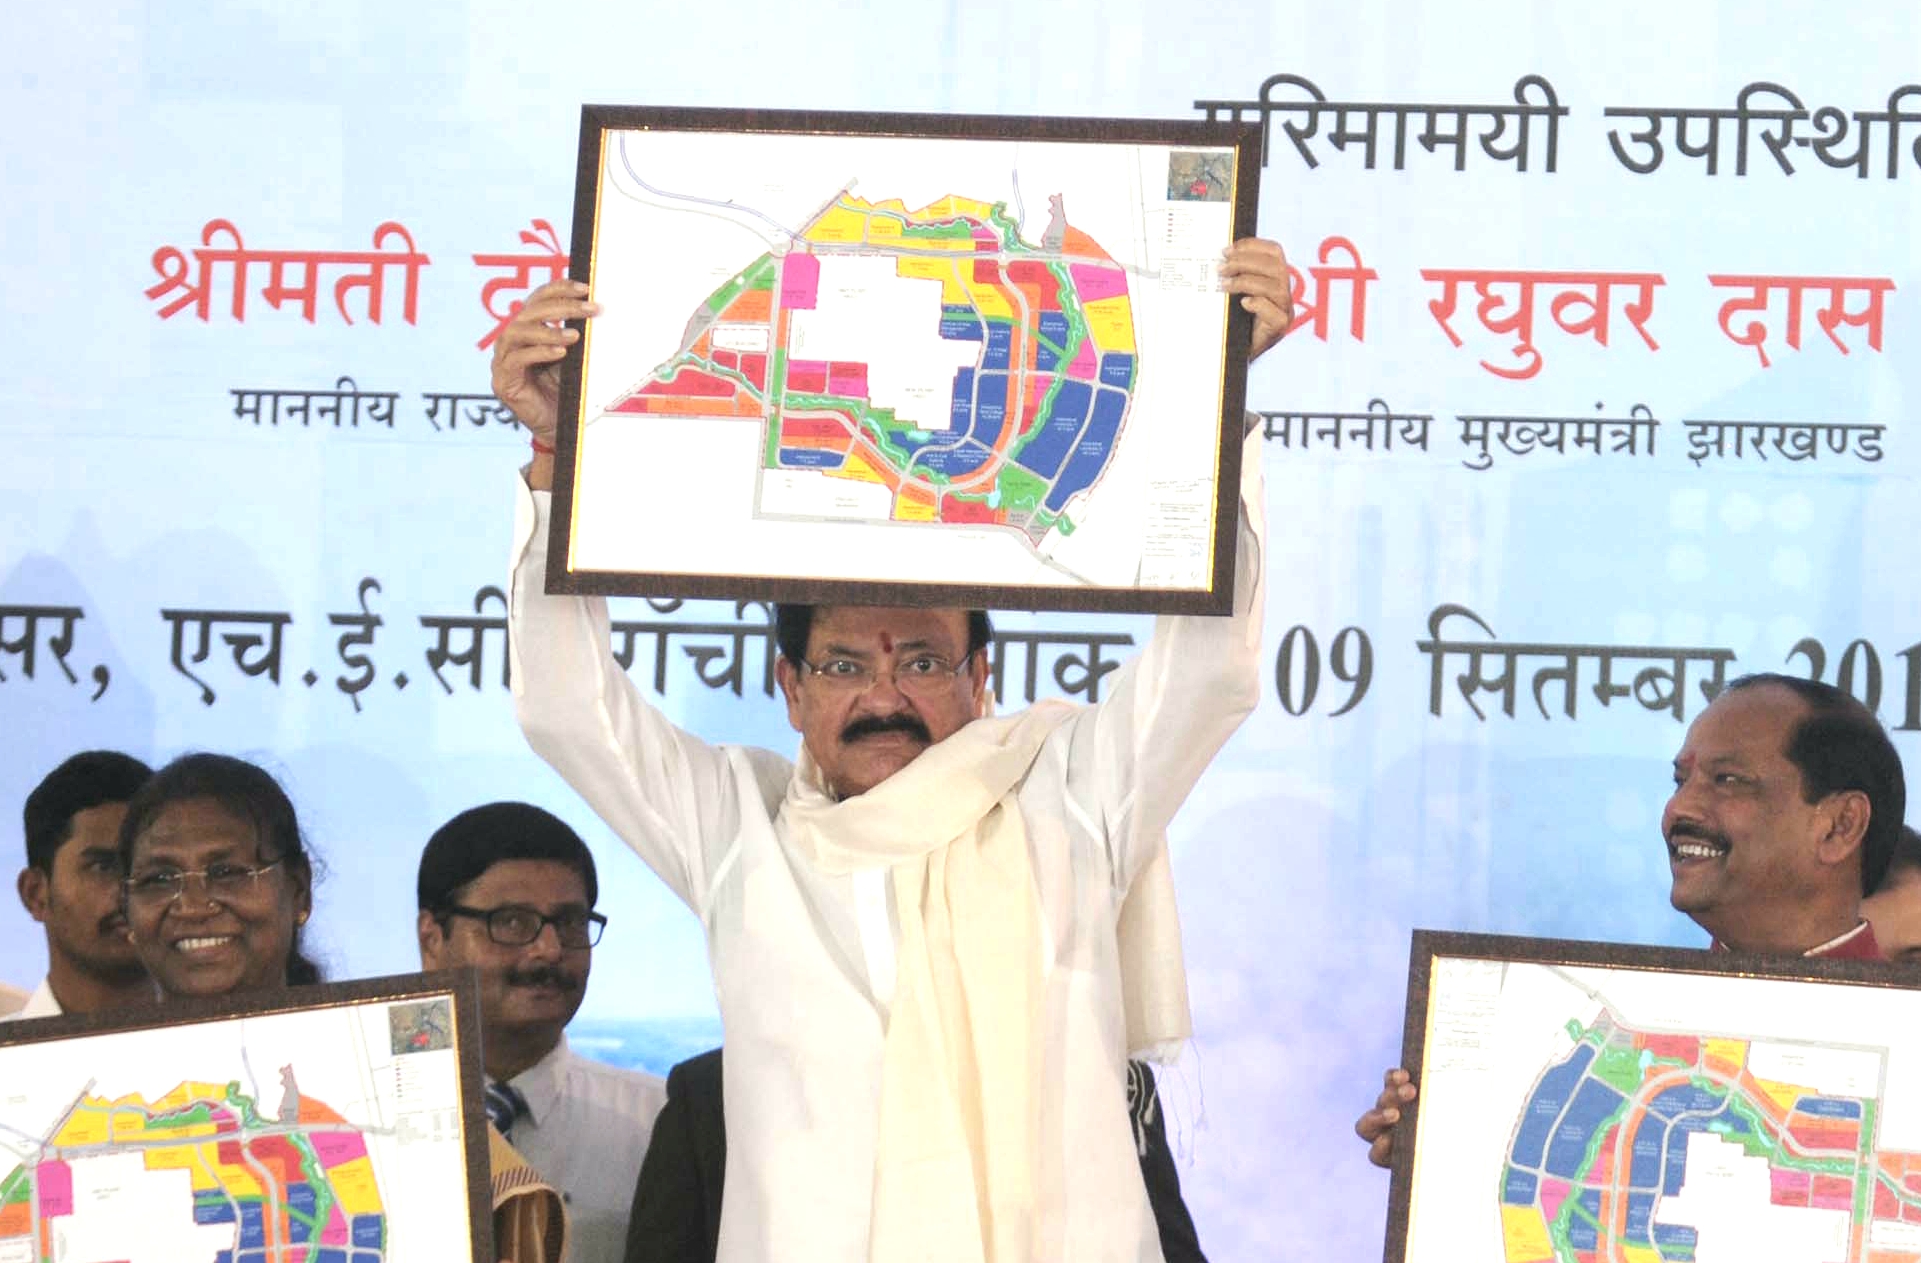 Lens Eye Exclusive :: Vice President, M Venkaiah Naidu lays the foundation stone of Smart City in Ranchi.